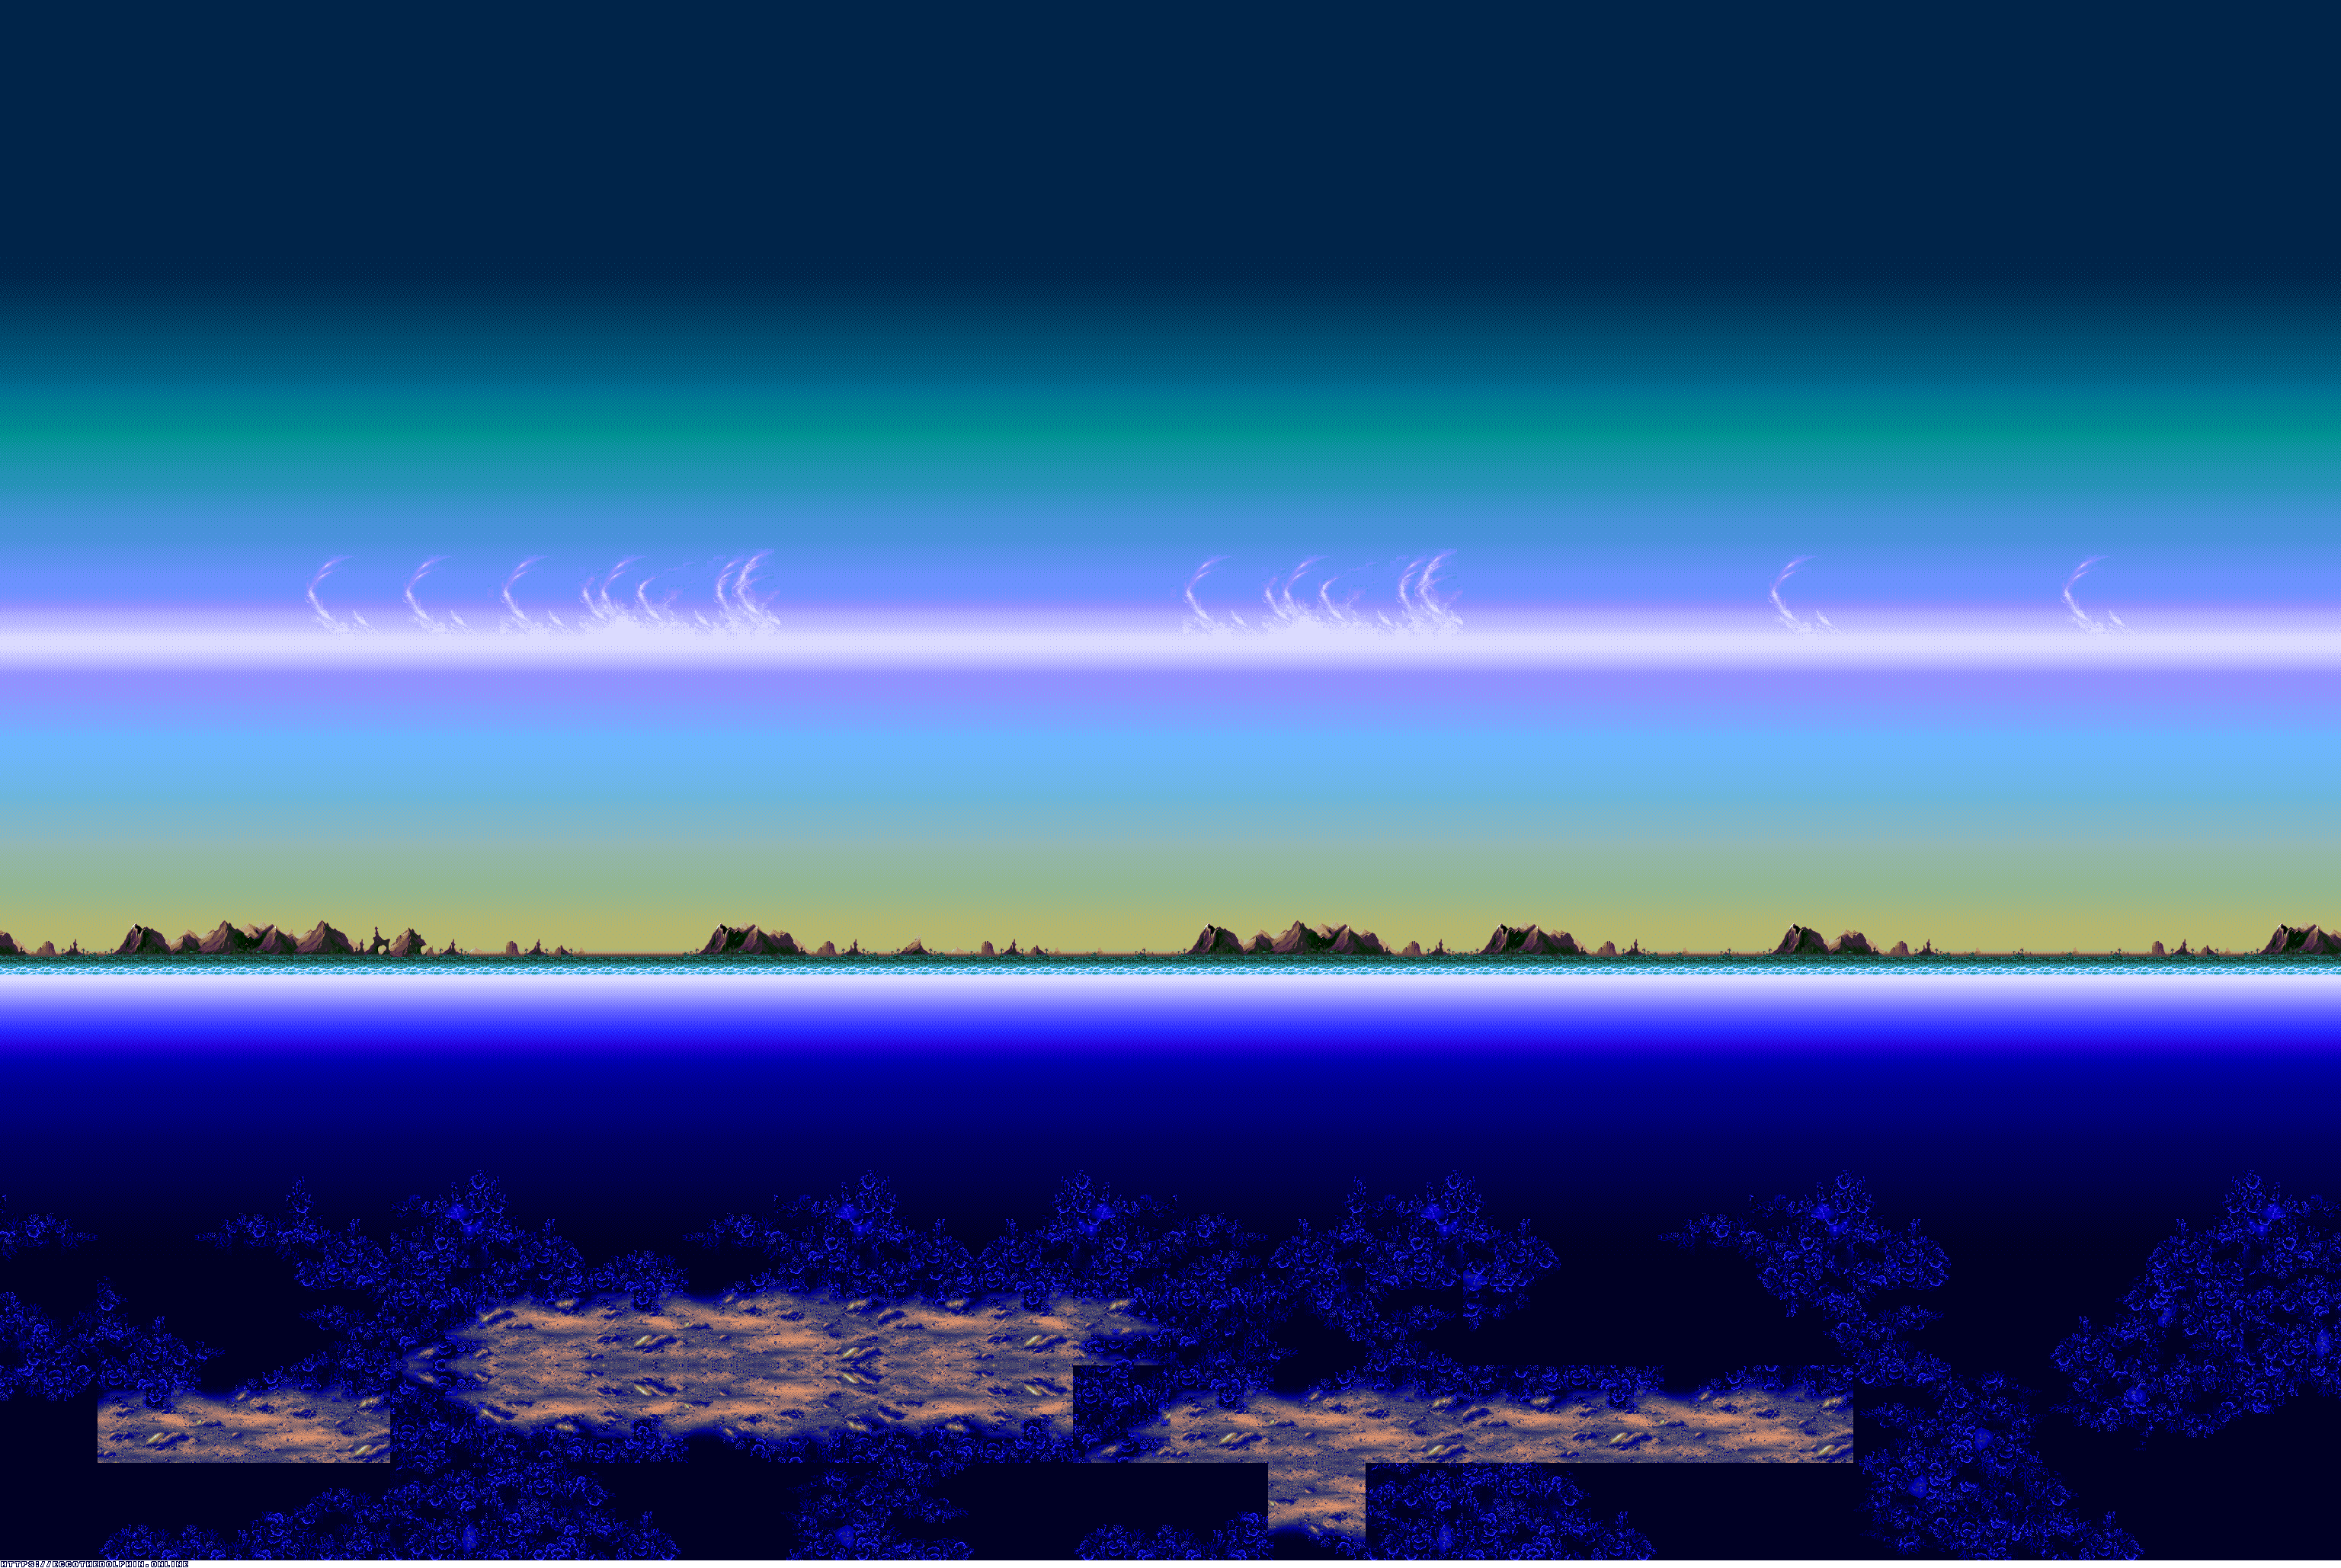 Ecco: The Tides of Time - Eagle's Bay (Background)